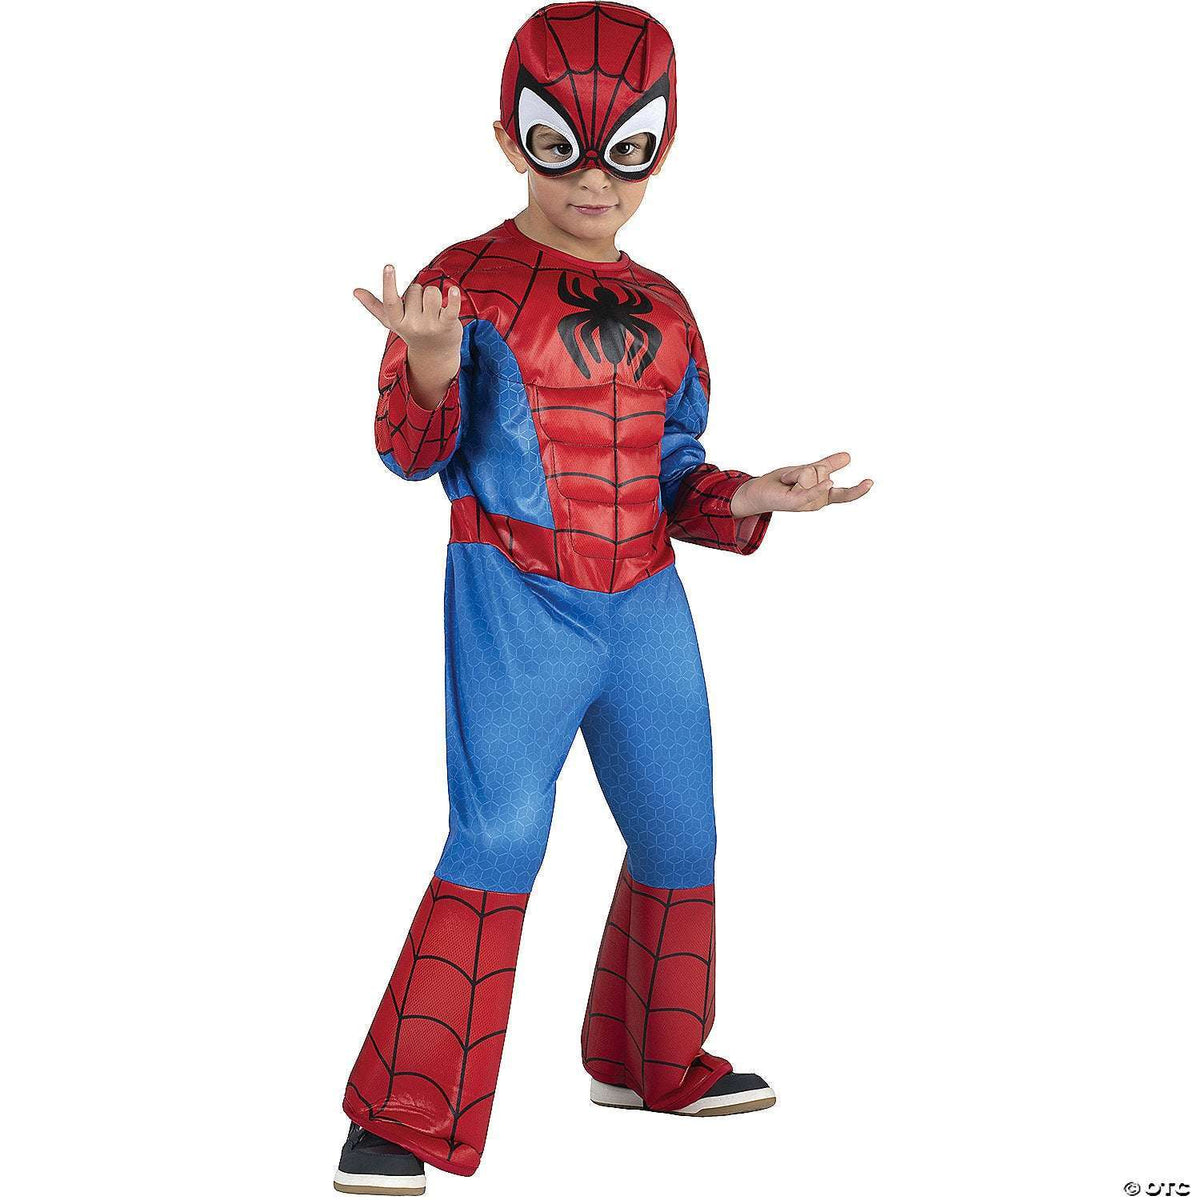 Marvel Spider-Man Toddler Costume in 3T-4T with Matching Mask